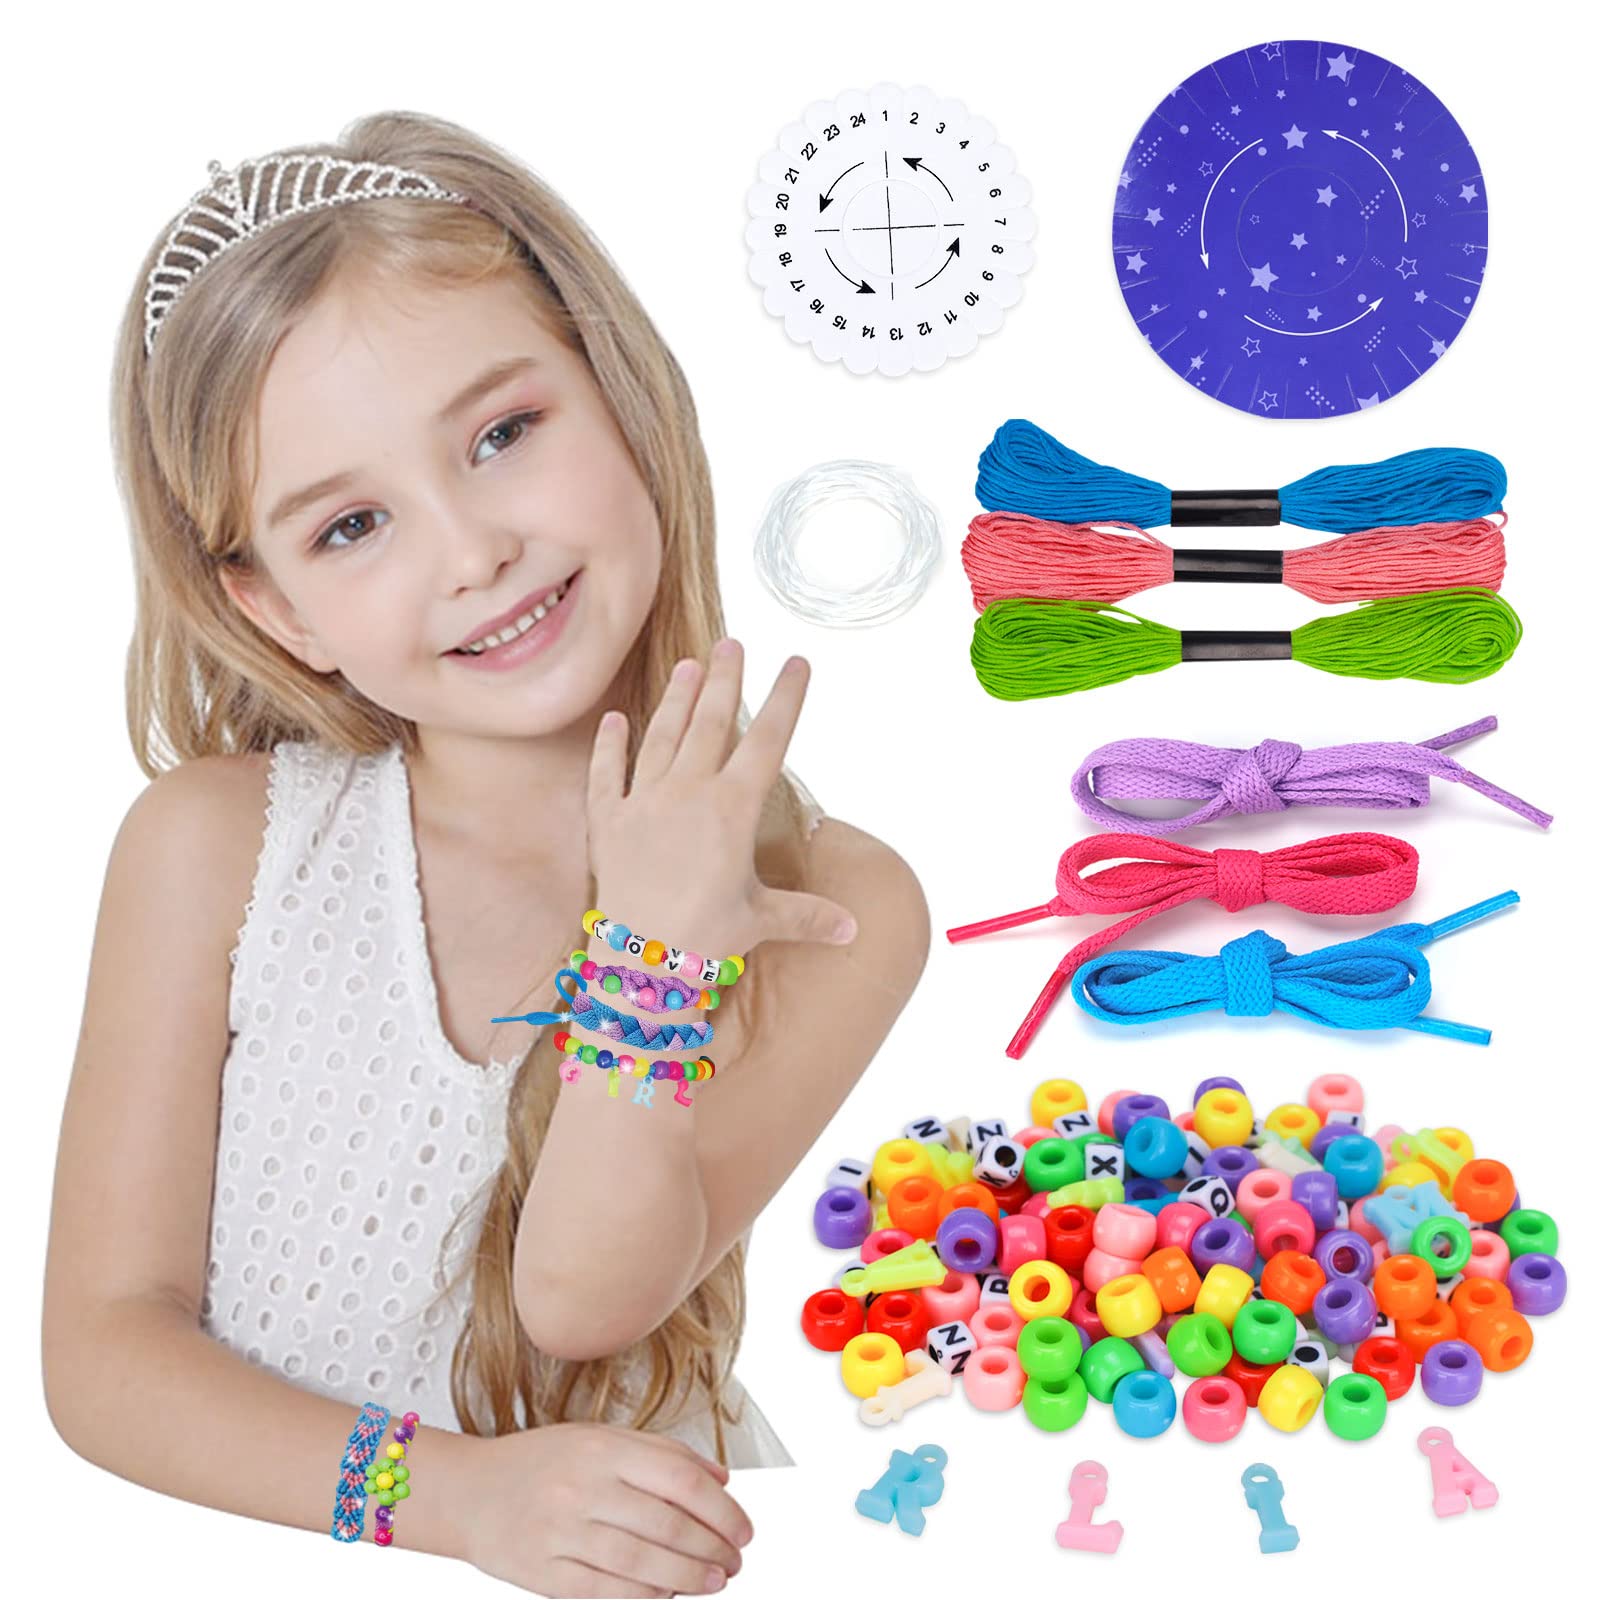 6 7 8 9 10 Year Old Girls Gifts Birthday Crafts Gifts for 6 7 8 Girls Gifts  Toys 7 8 9 10 Year Old Girls Bracelet Making Kits for Girls Rubber Band